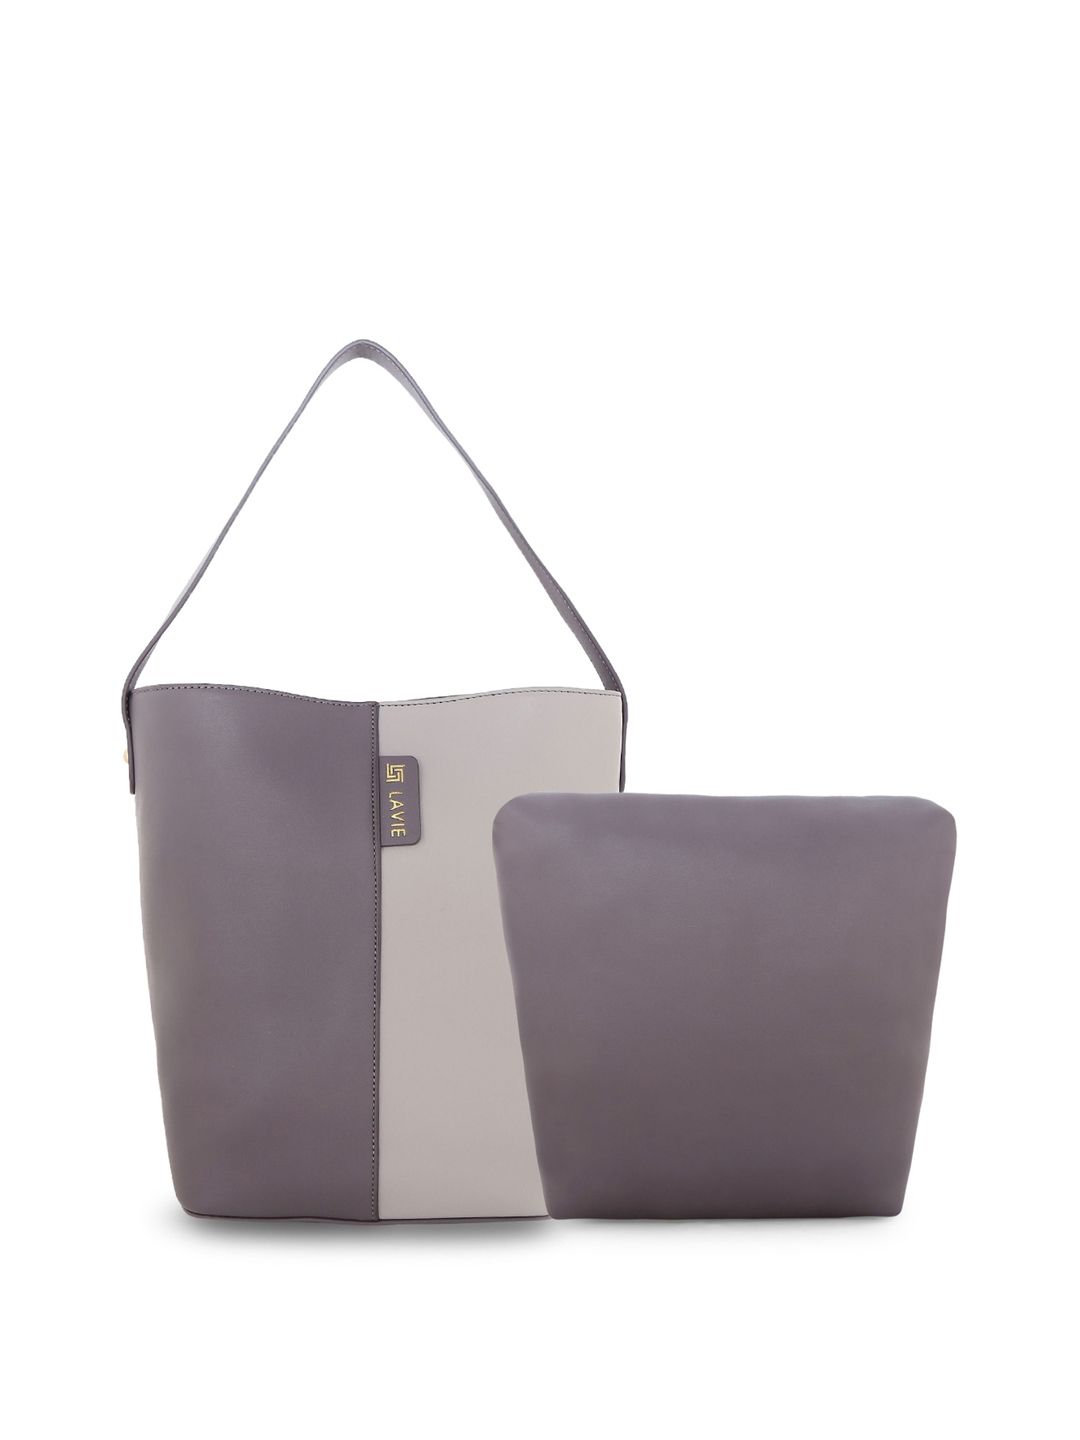 Lavie Grey Colourblocked Shoulder Bag with Pouch Price in India